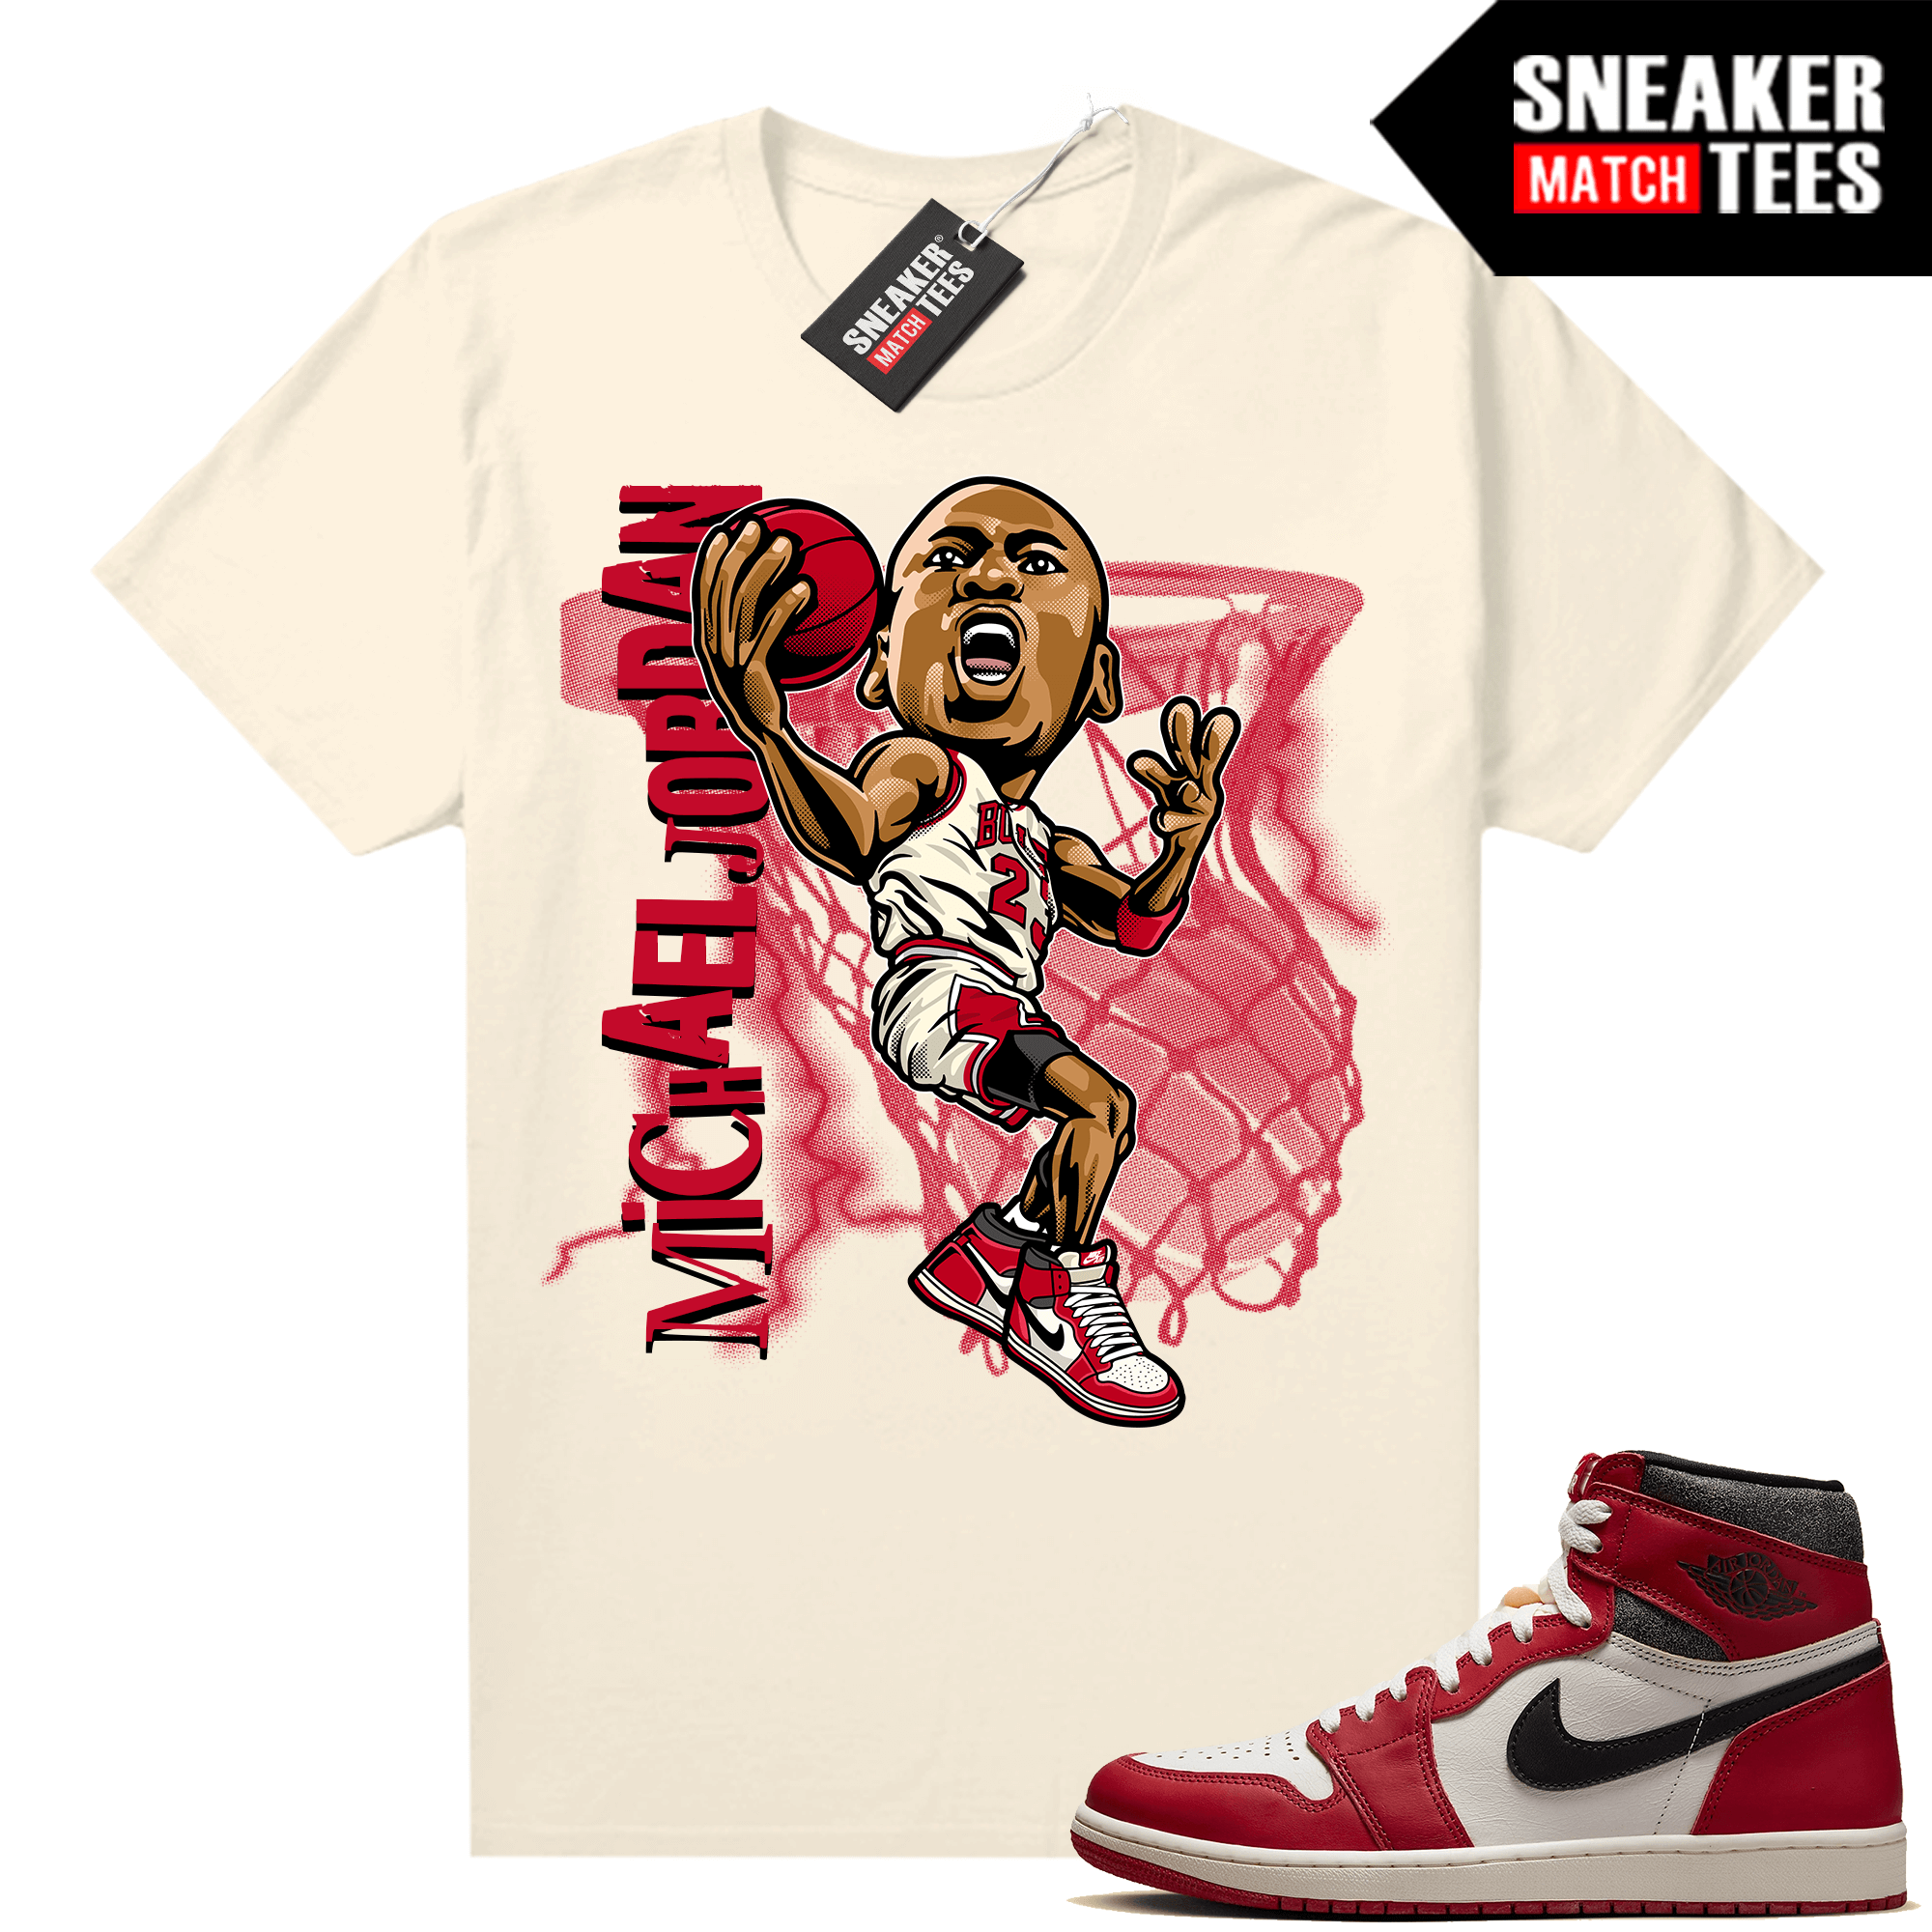 Chicago 1s Lost and Found Urlfreeze Sneaker Match Shirt MJ Showtime